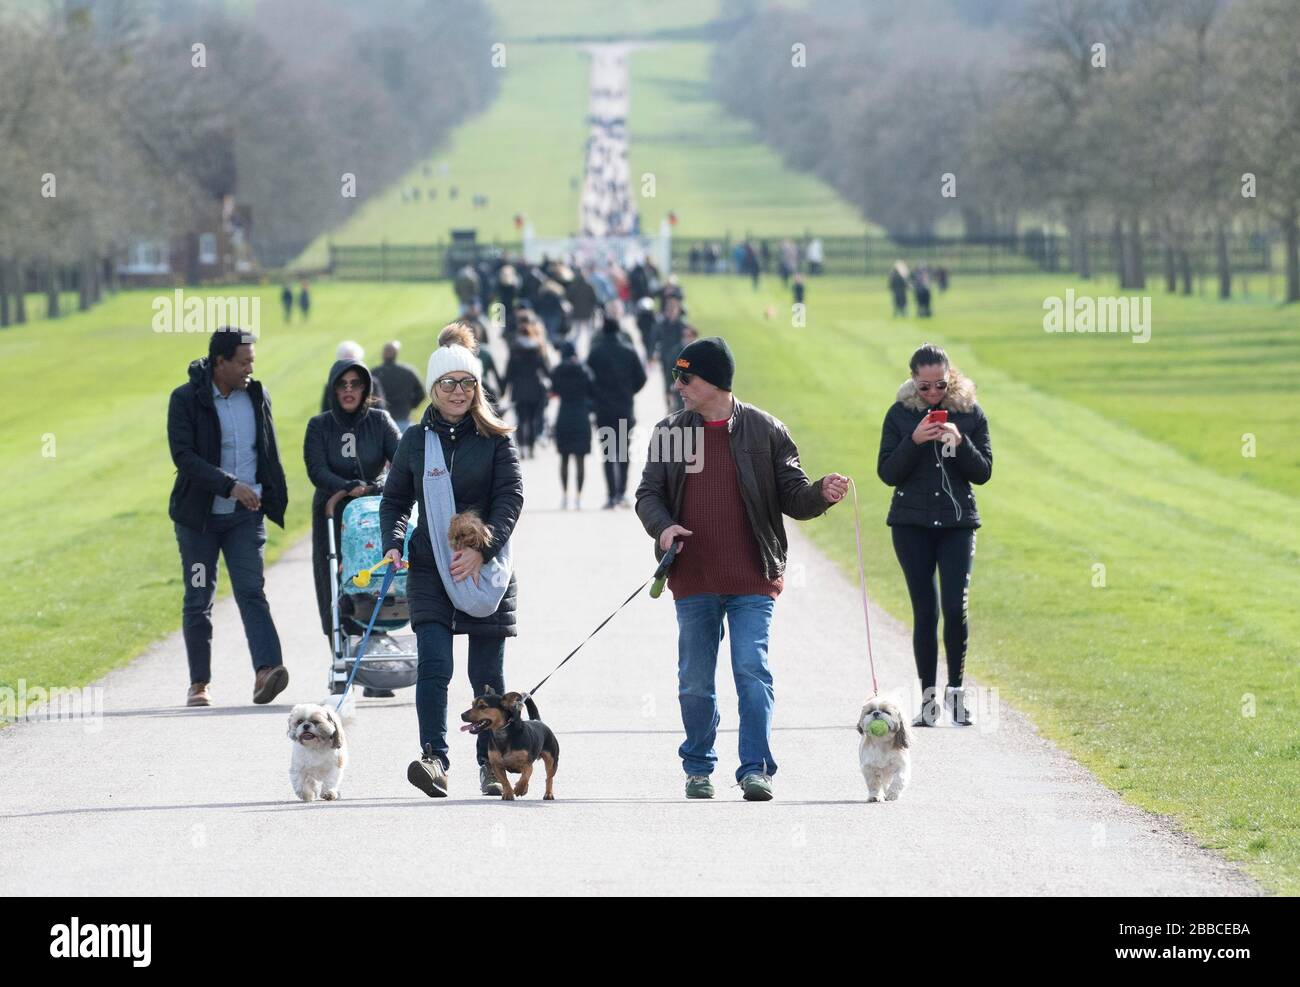 People walking on the Long Walk in Windsor Great Park, UK. The covid19 outbreak and social distancing measures were recently announced 21.03.2020 Stock Photo